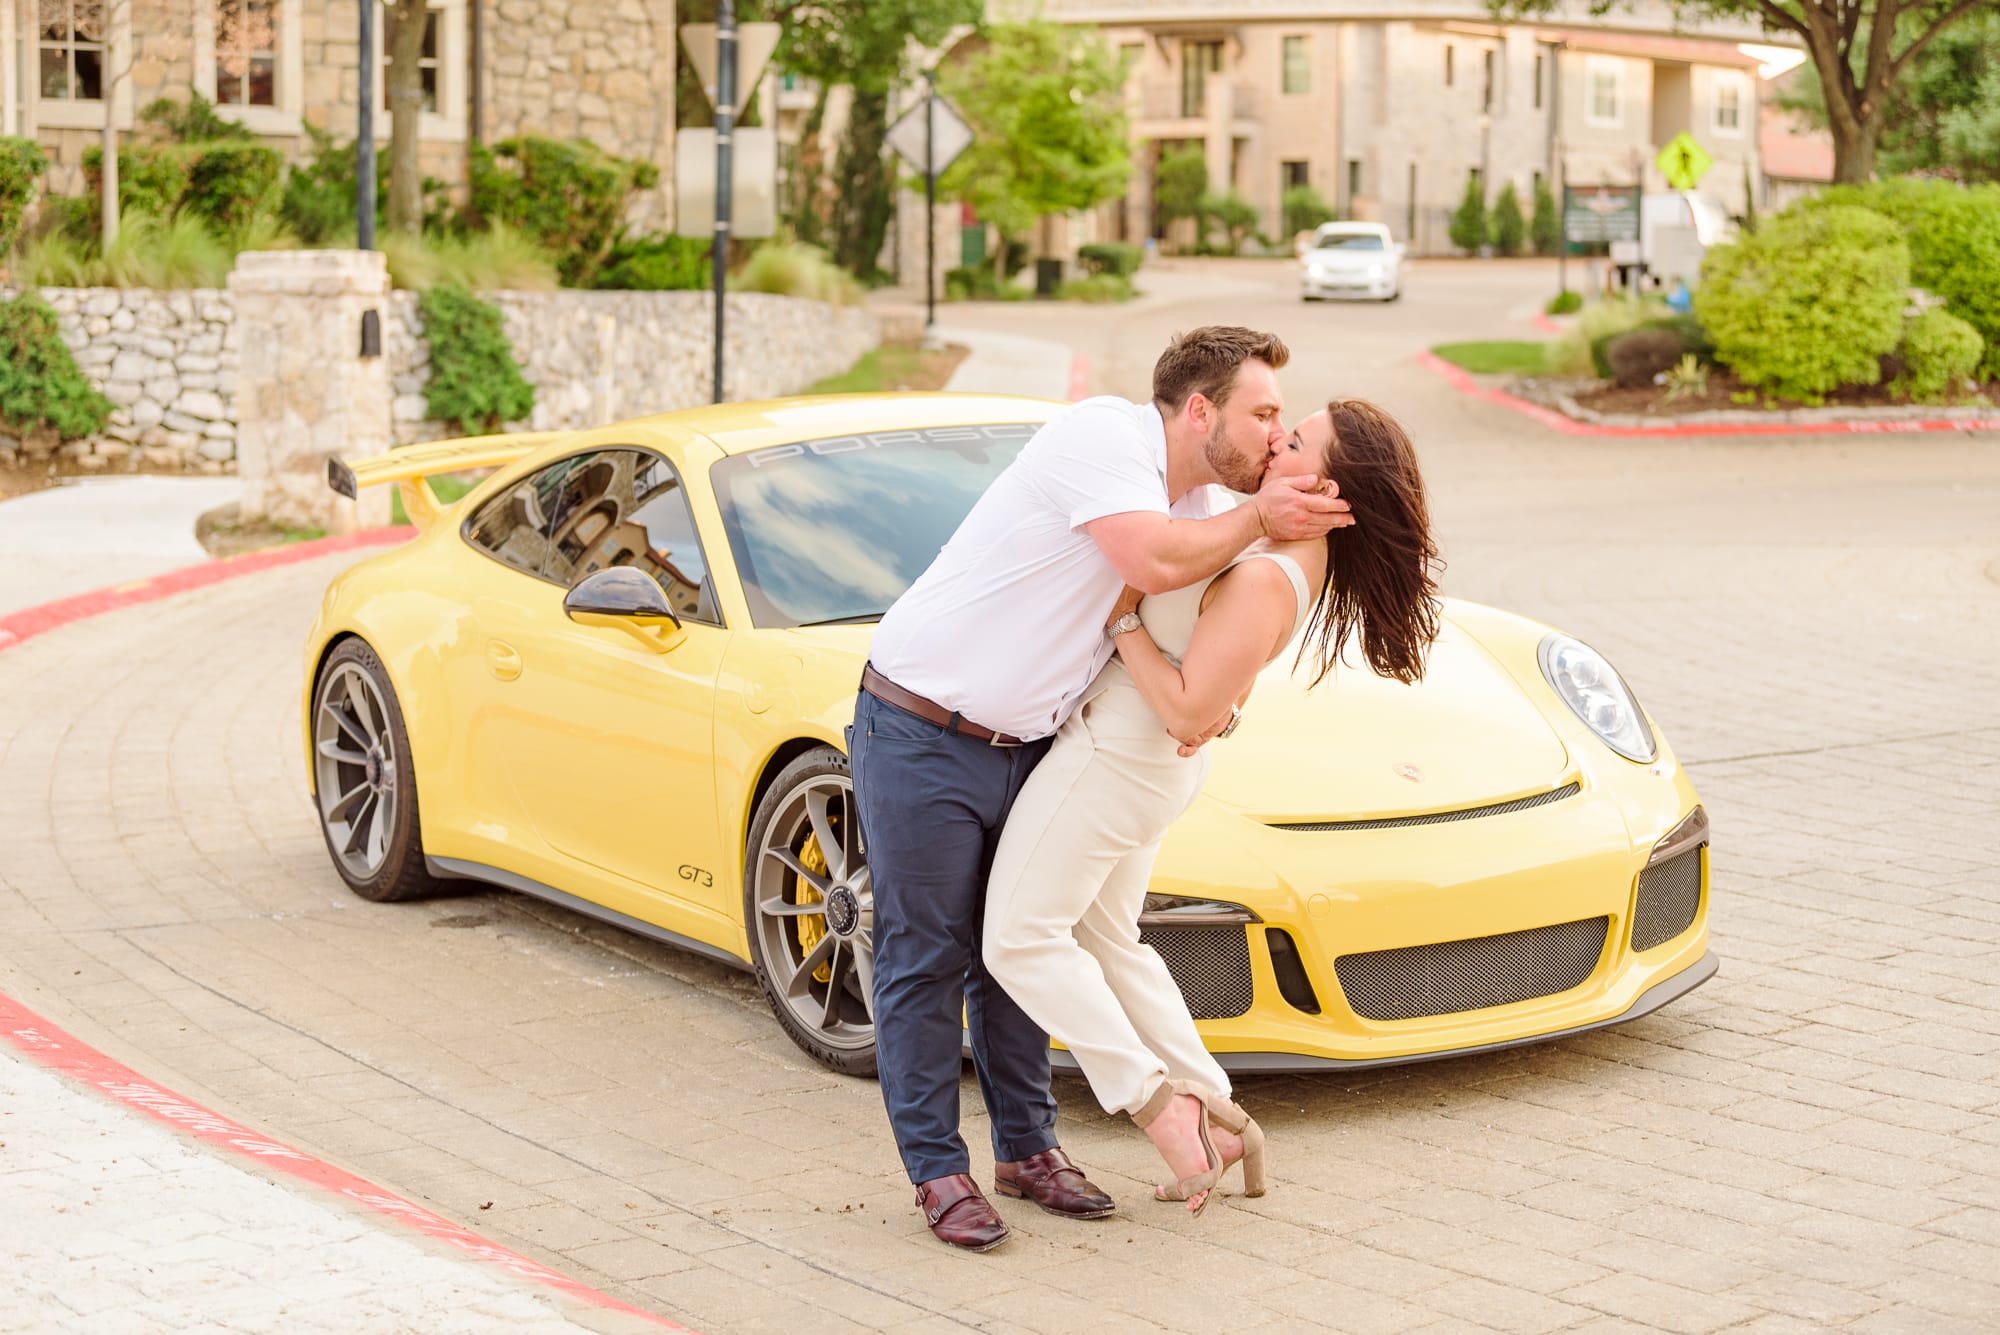 The yellow porche car in the background really makes these engagement photos have a European style.